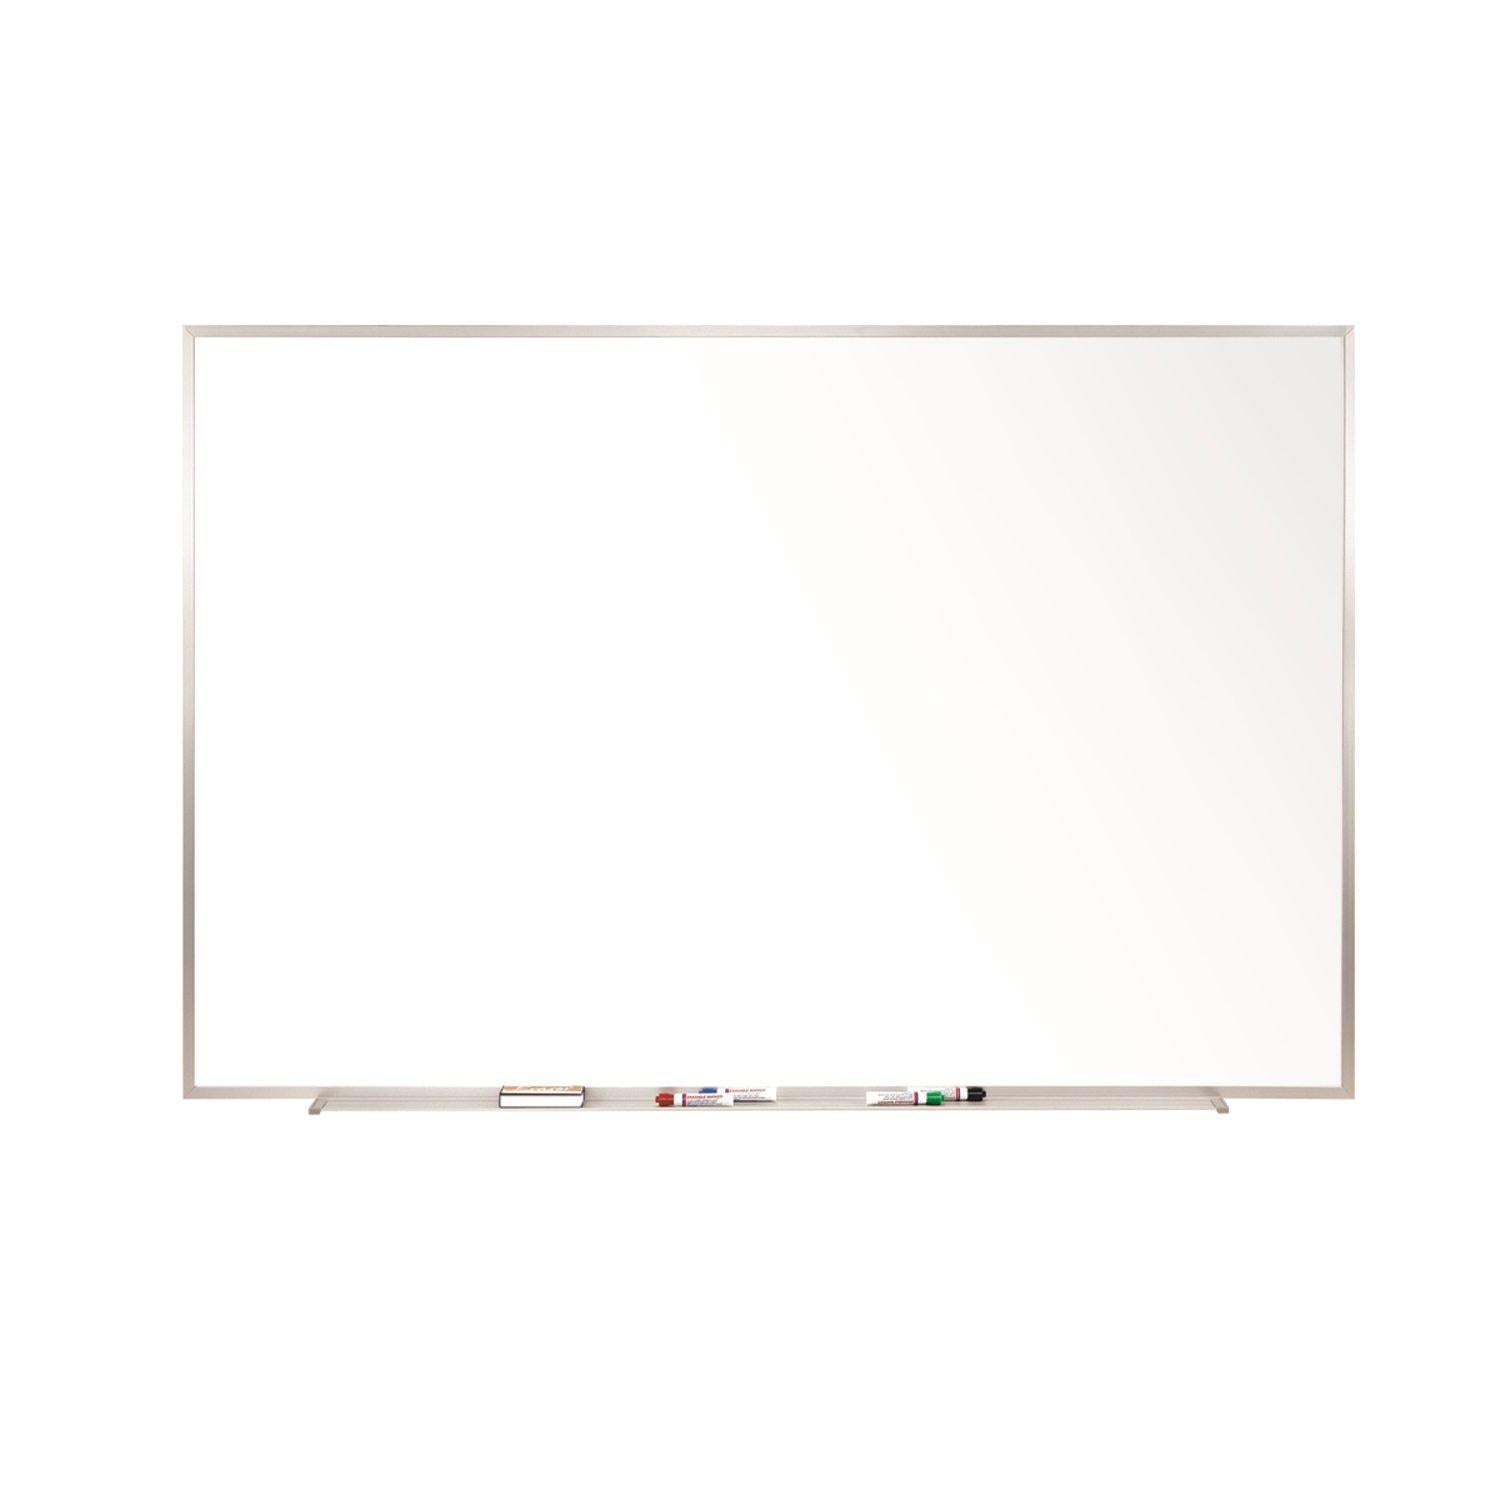 Magnetic Porcelain Whiteboard with Detachable Marker Tray, Satin Aluminum Frame, 3' H x 5' W, LIFETIME WARRANTY